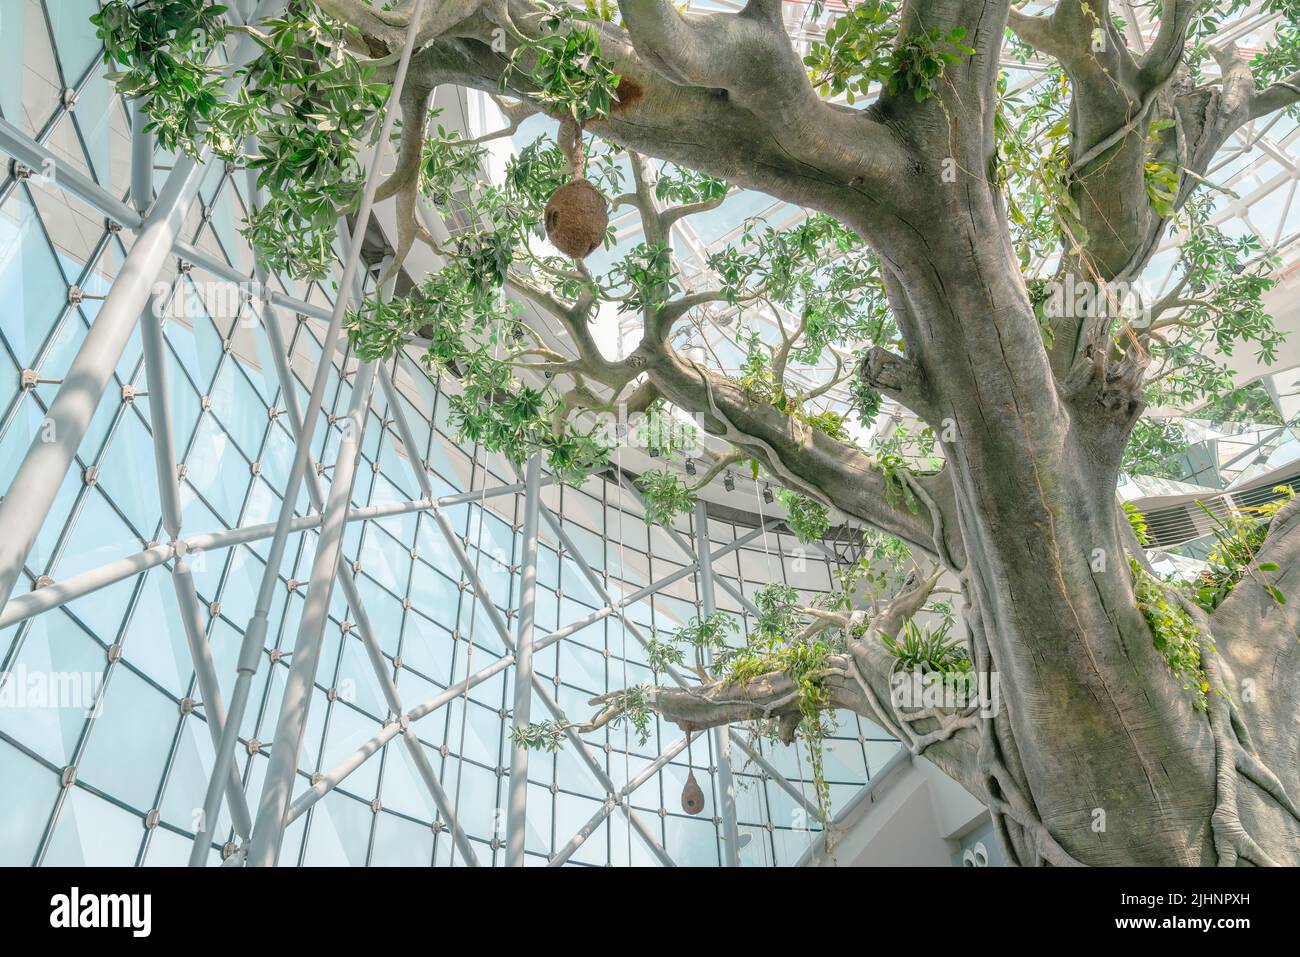 Dubai, UAE, October 8, 2016: The Green Planet Dubai - indoor rainforest environment with tropical birds, animals and plants Stock Photo